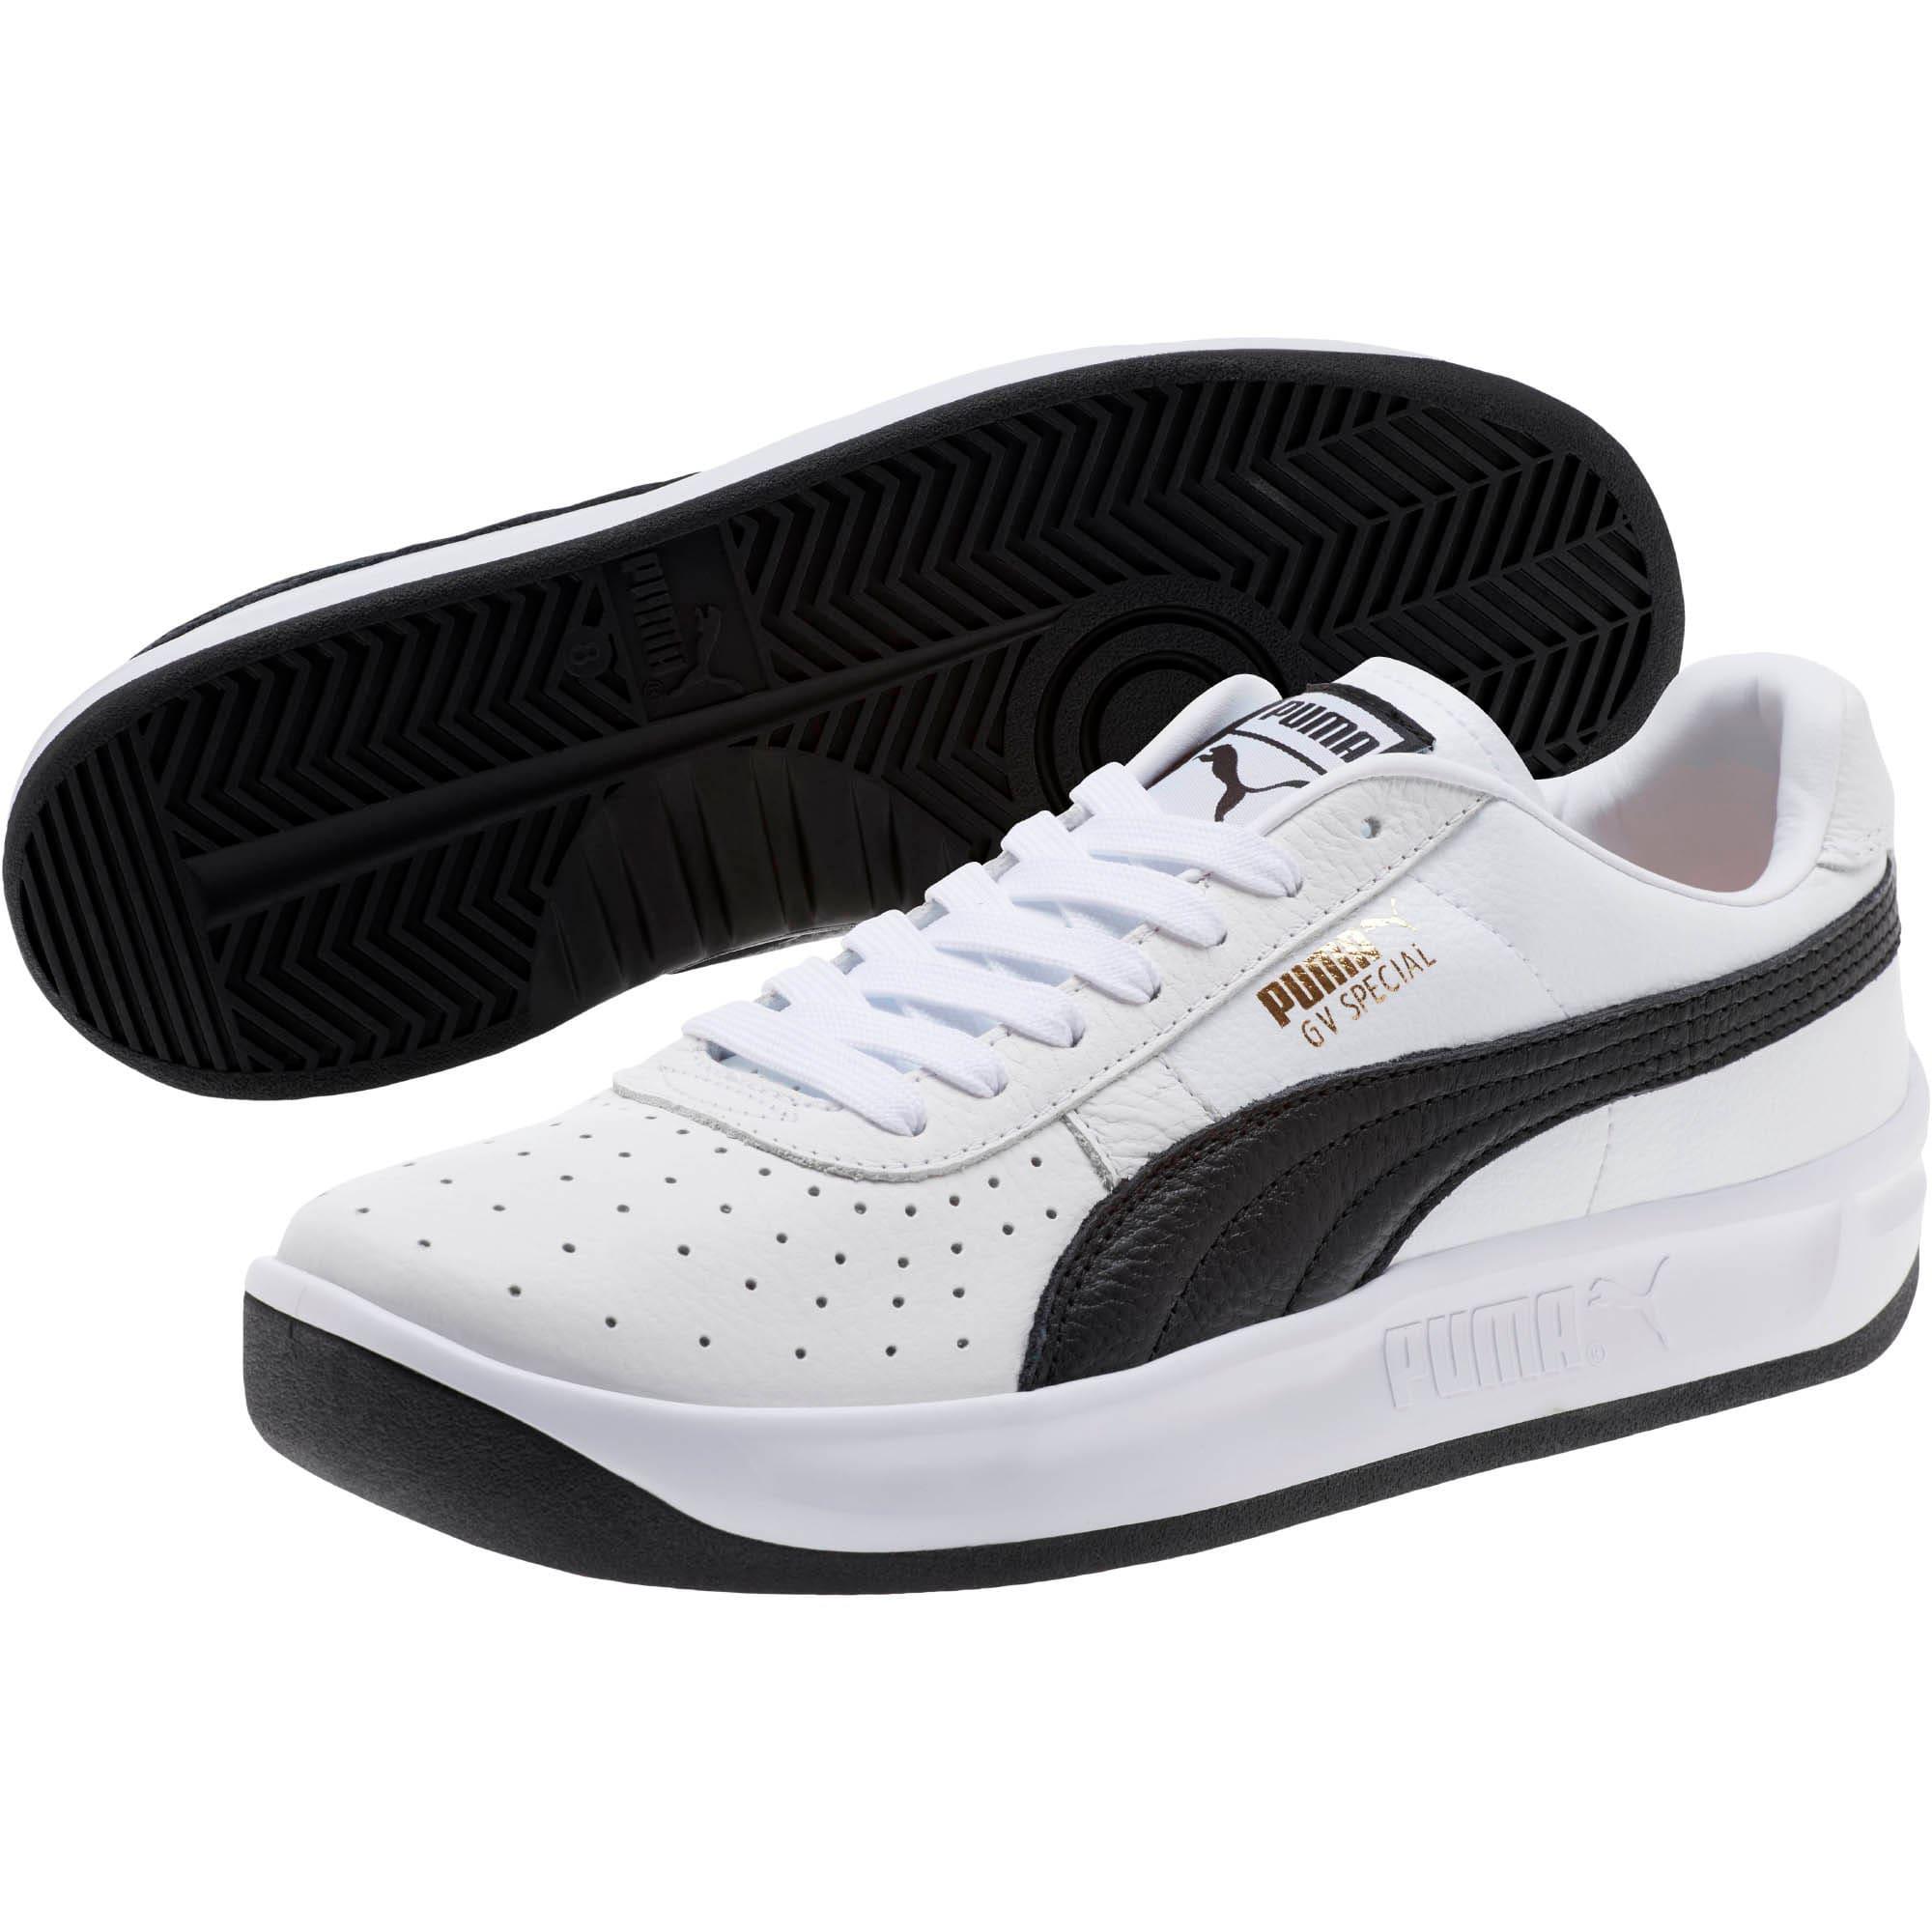 PUMA Leather Gv Special+ Sneakers in White for Men - Lyst